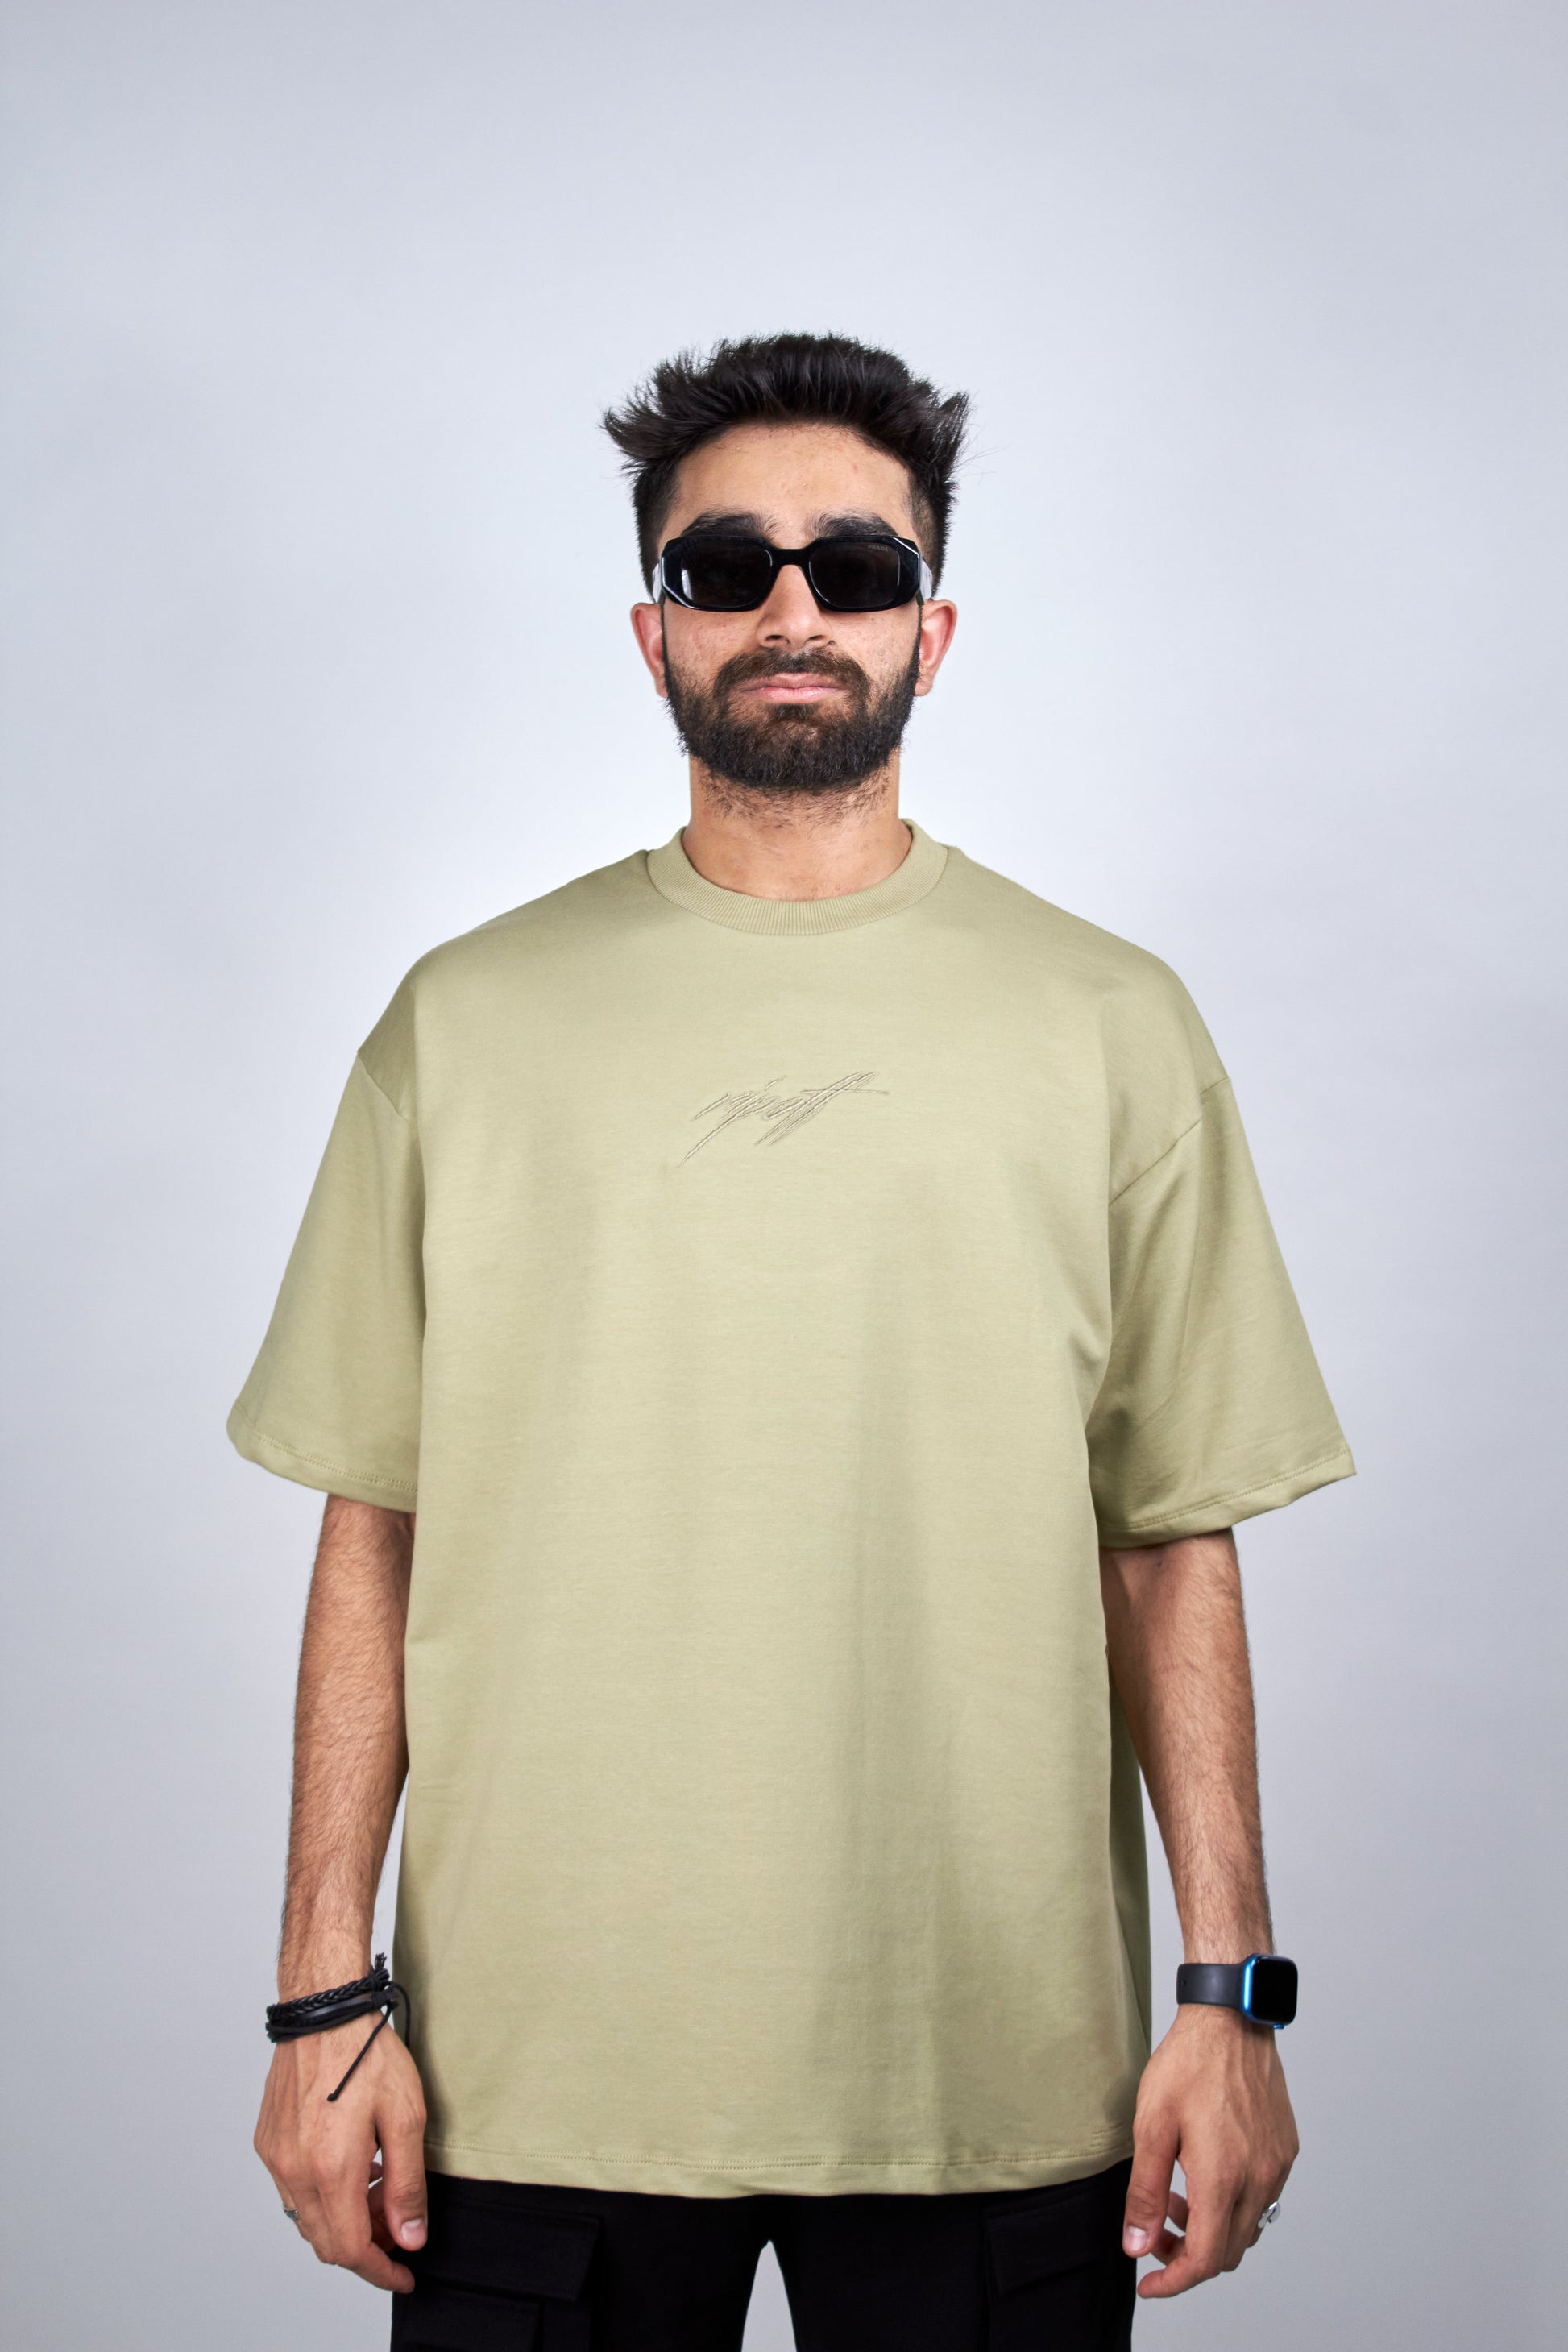 Sage Green Tee (Oversized Tshirts) by Ripoff